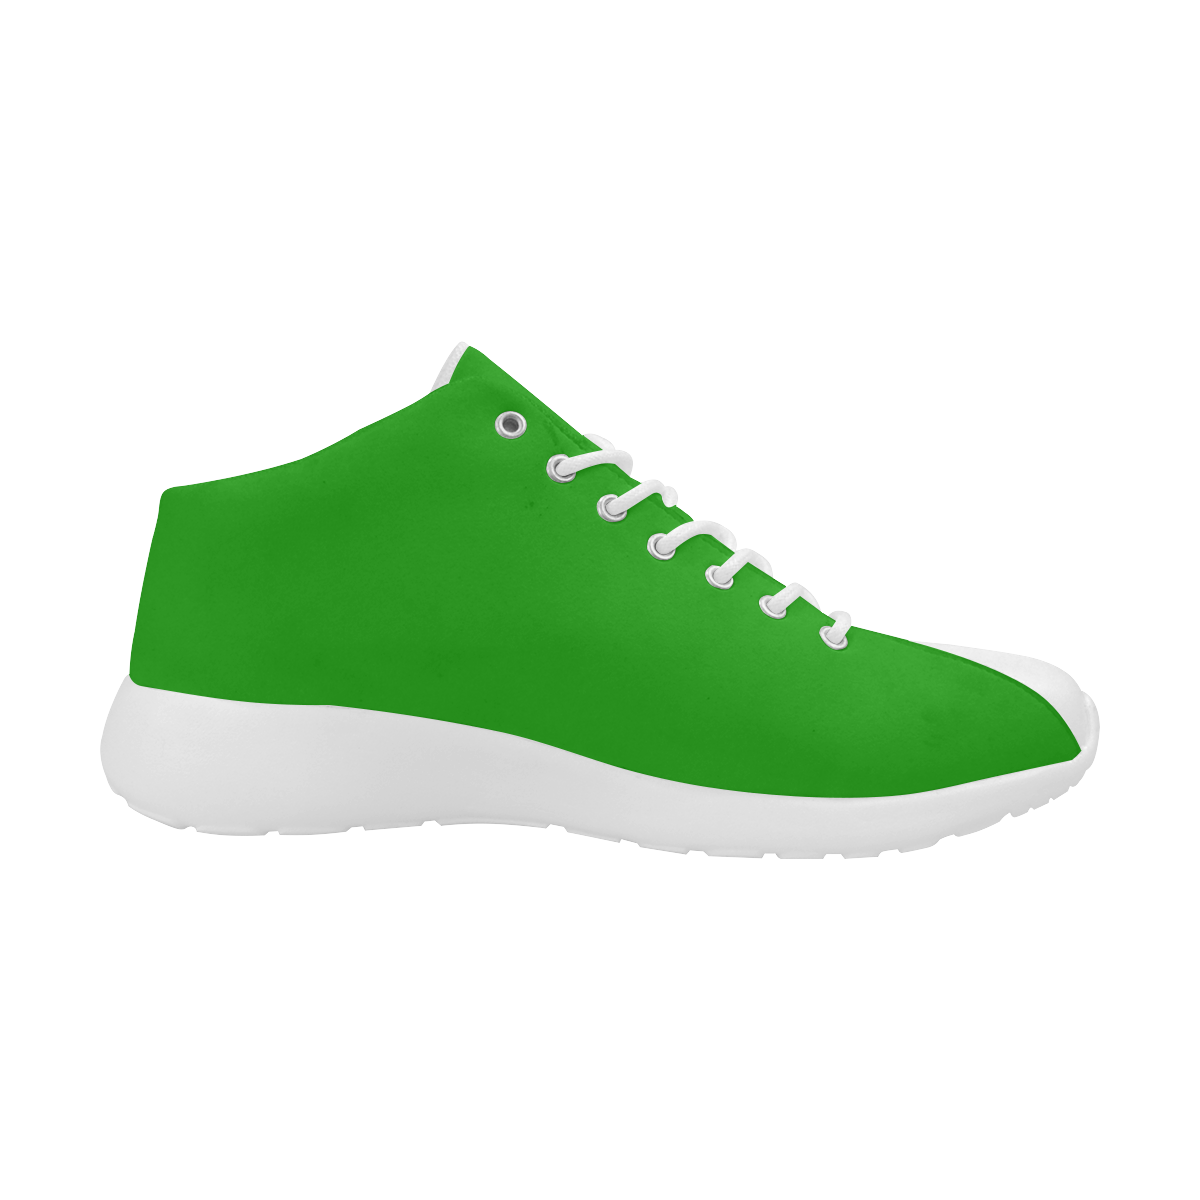 Notable Neon Green Solid Colored Men's Basketball Training Shoes (Model 47502)